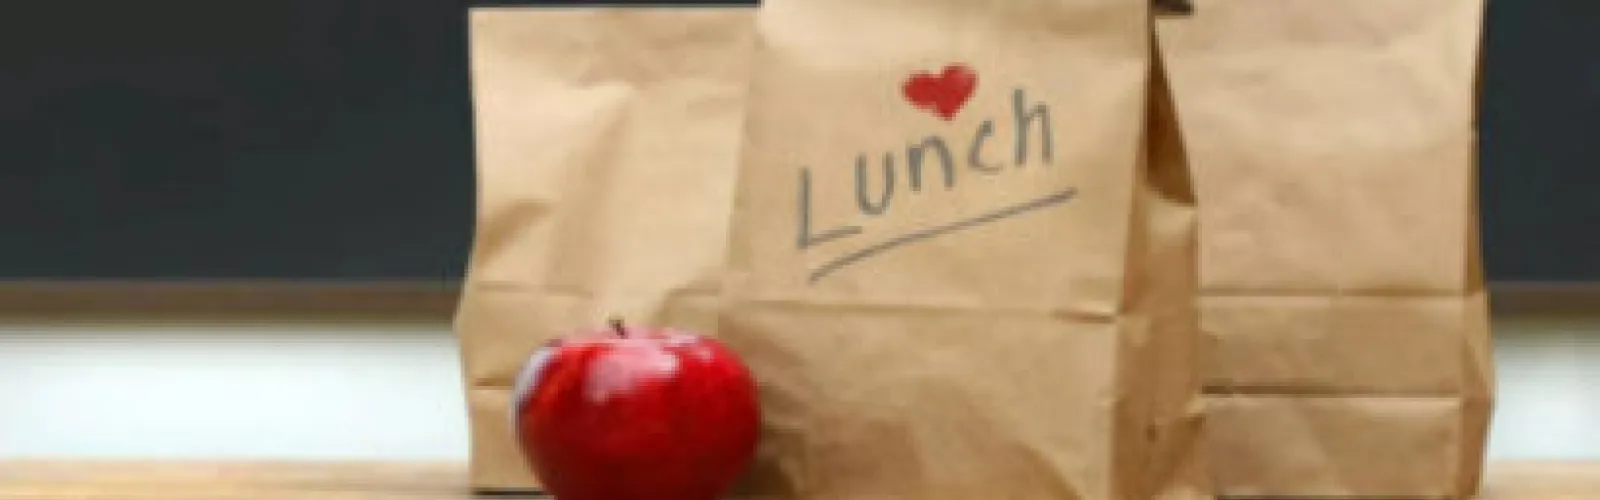 Three lunch bags with an apple. The front lunch bag is labeled Lunch and has a heart on it.